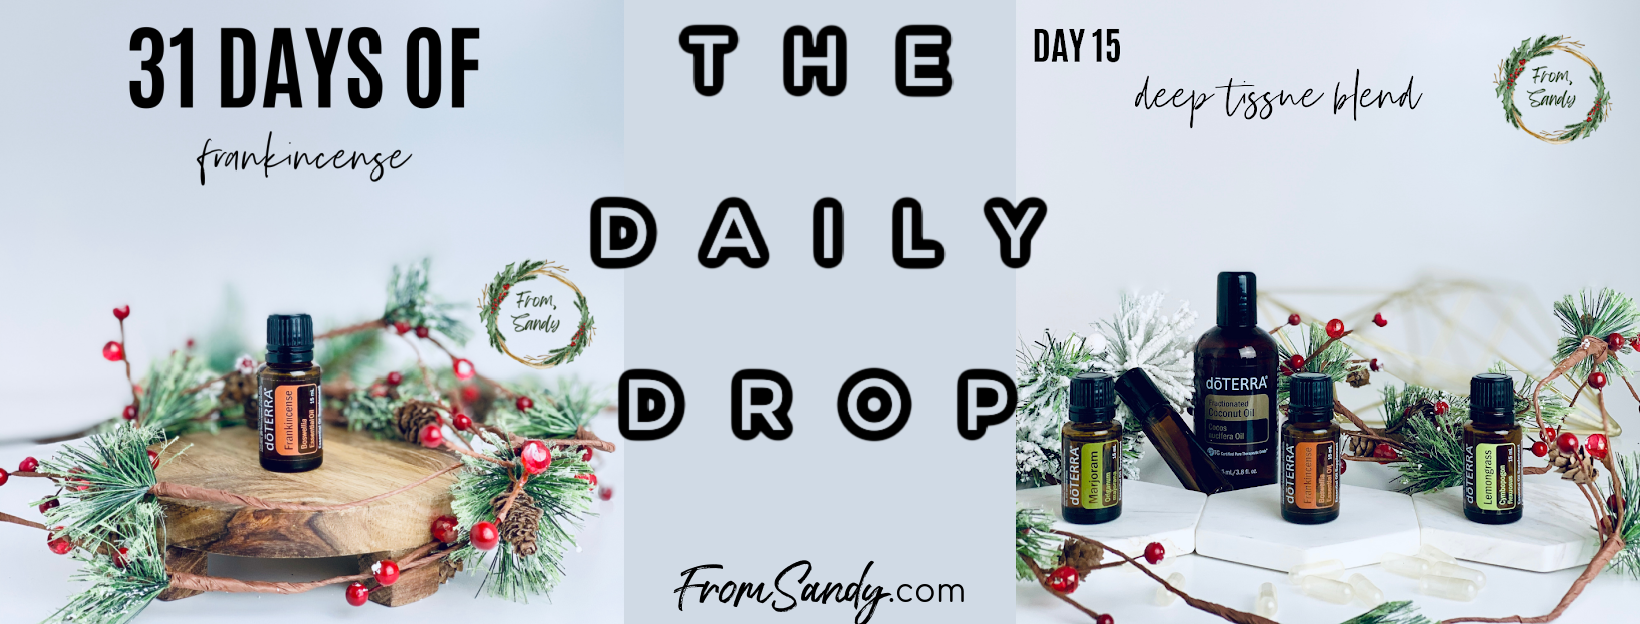 Deep Tissue Blend (31 Days of Frankincense: Day 15), From Sandy